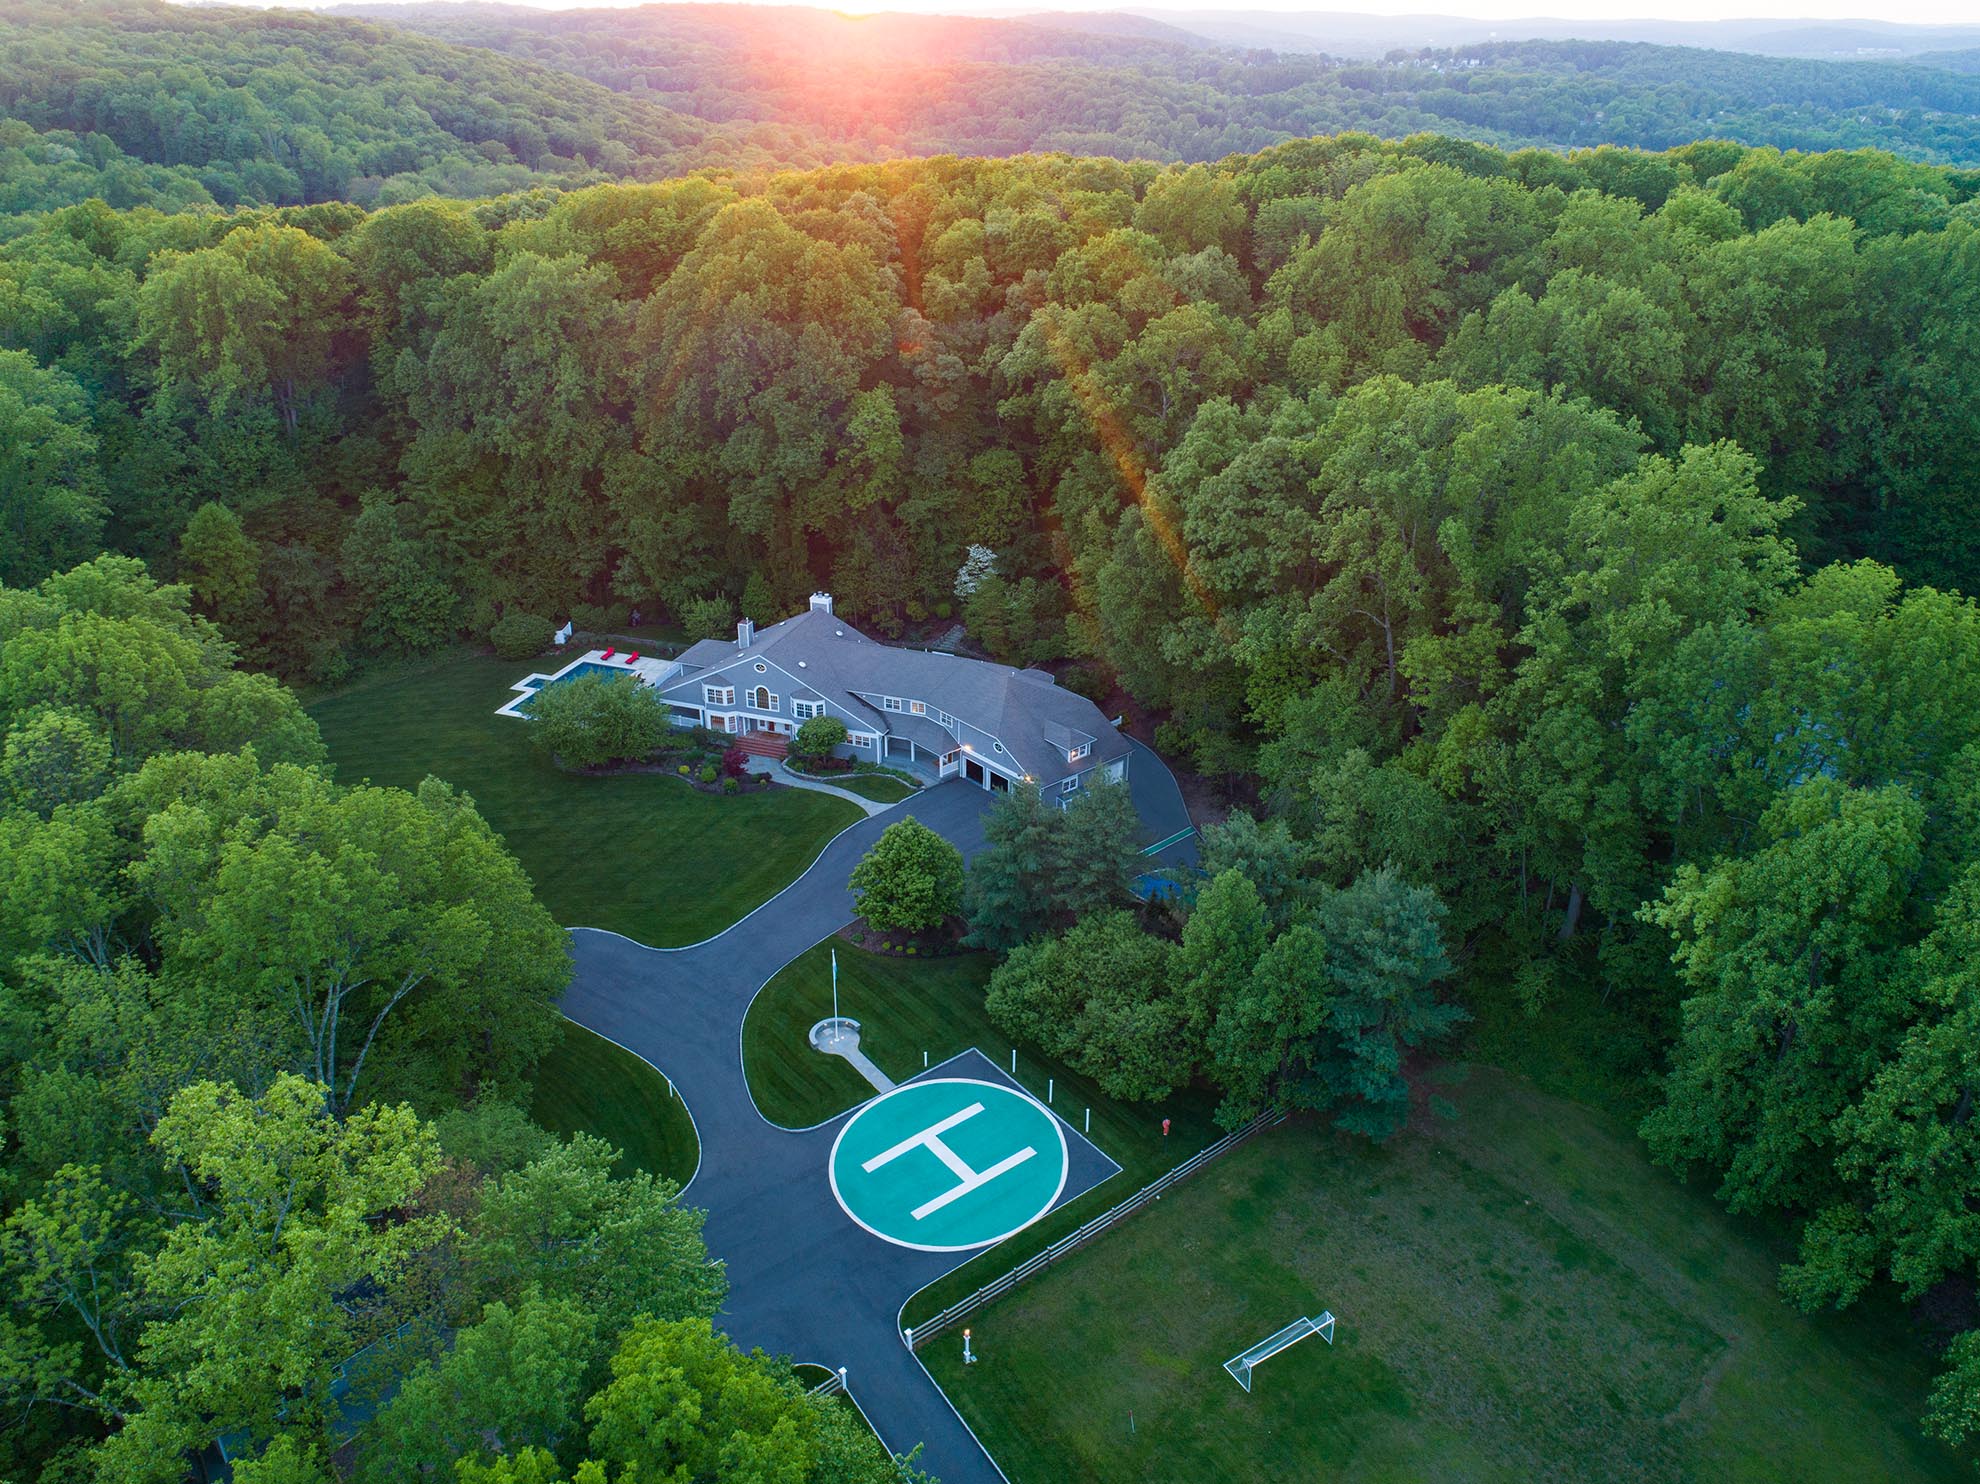 Drone photograph of Home in Randolph NJ with a Helipad